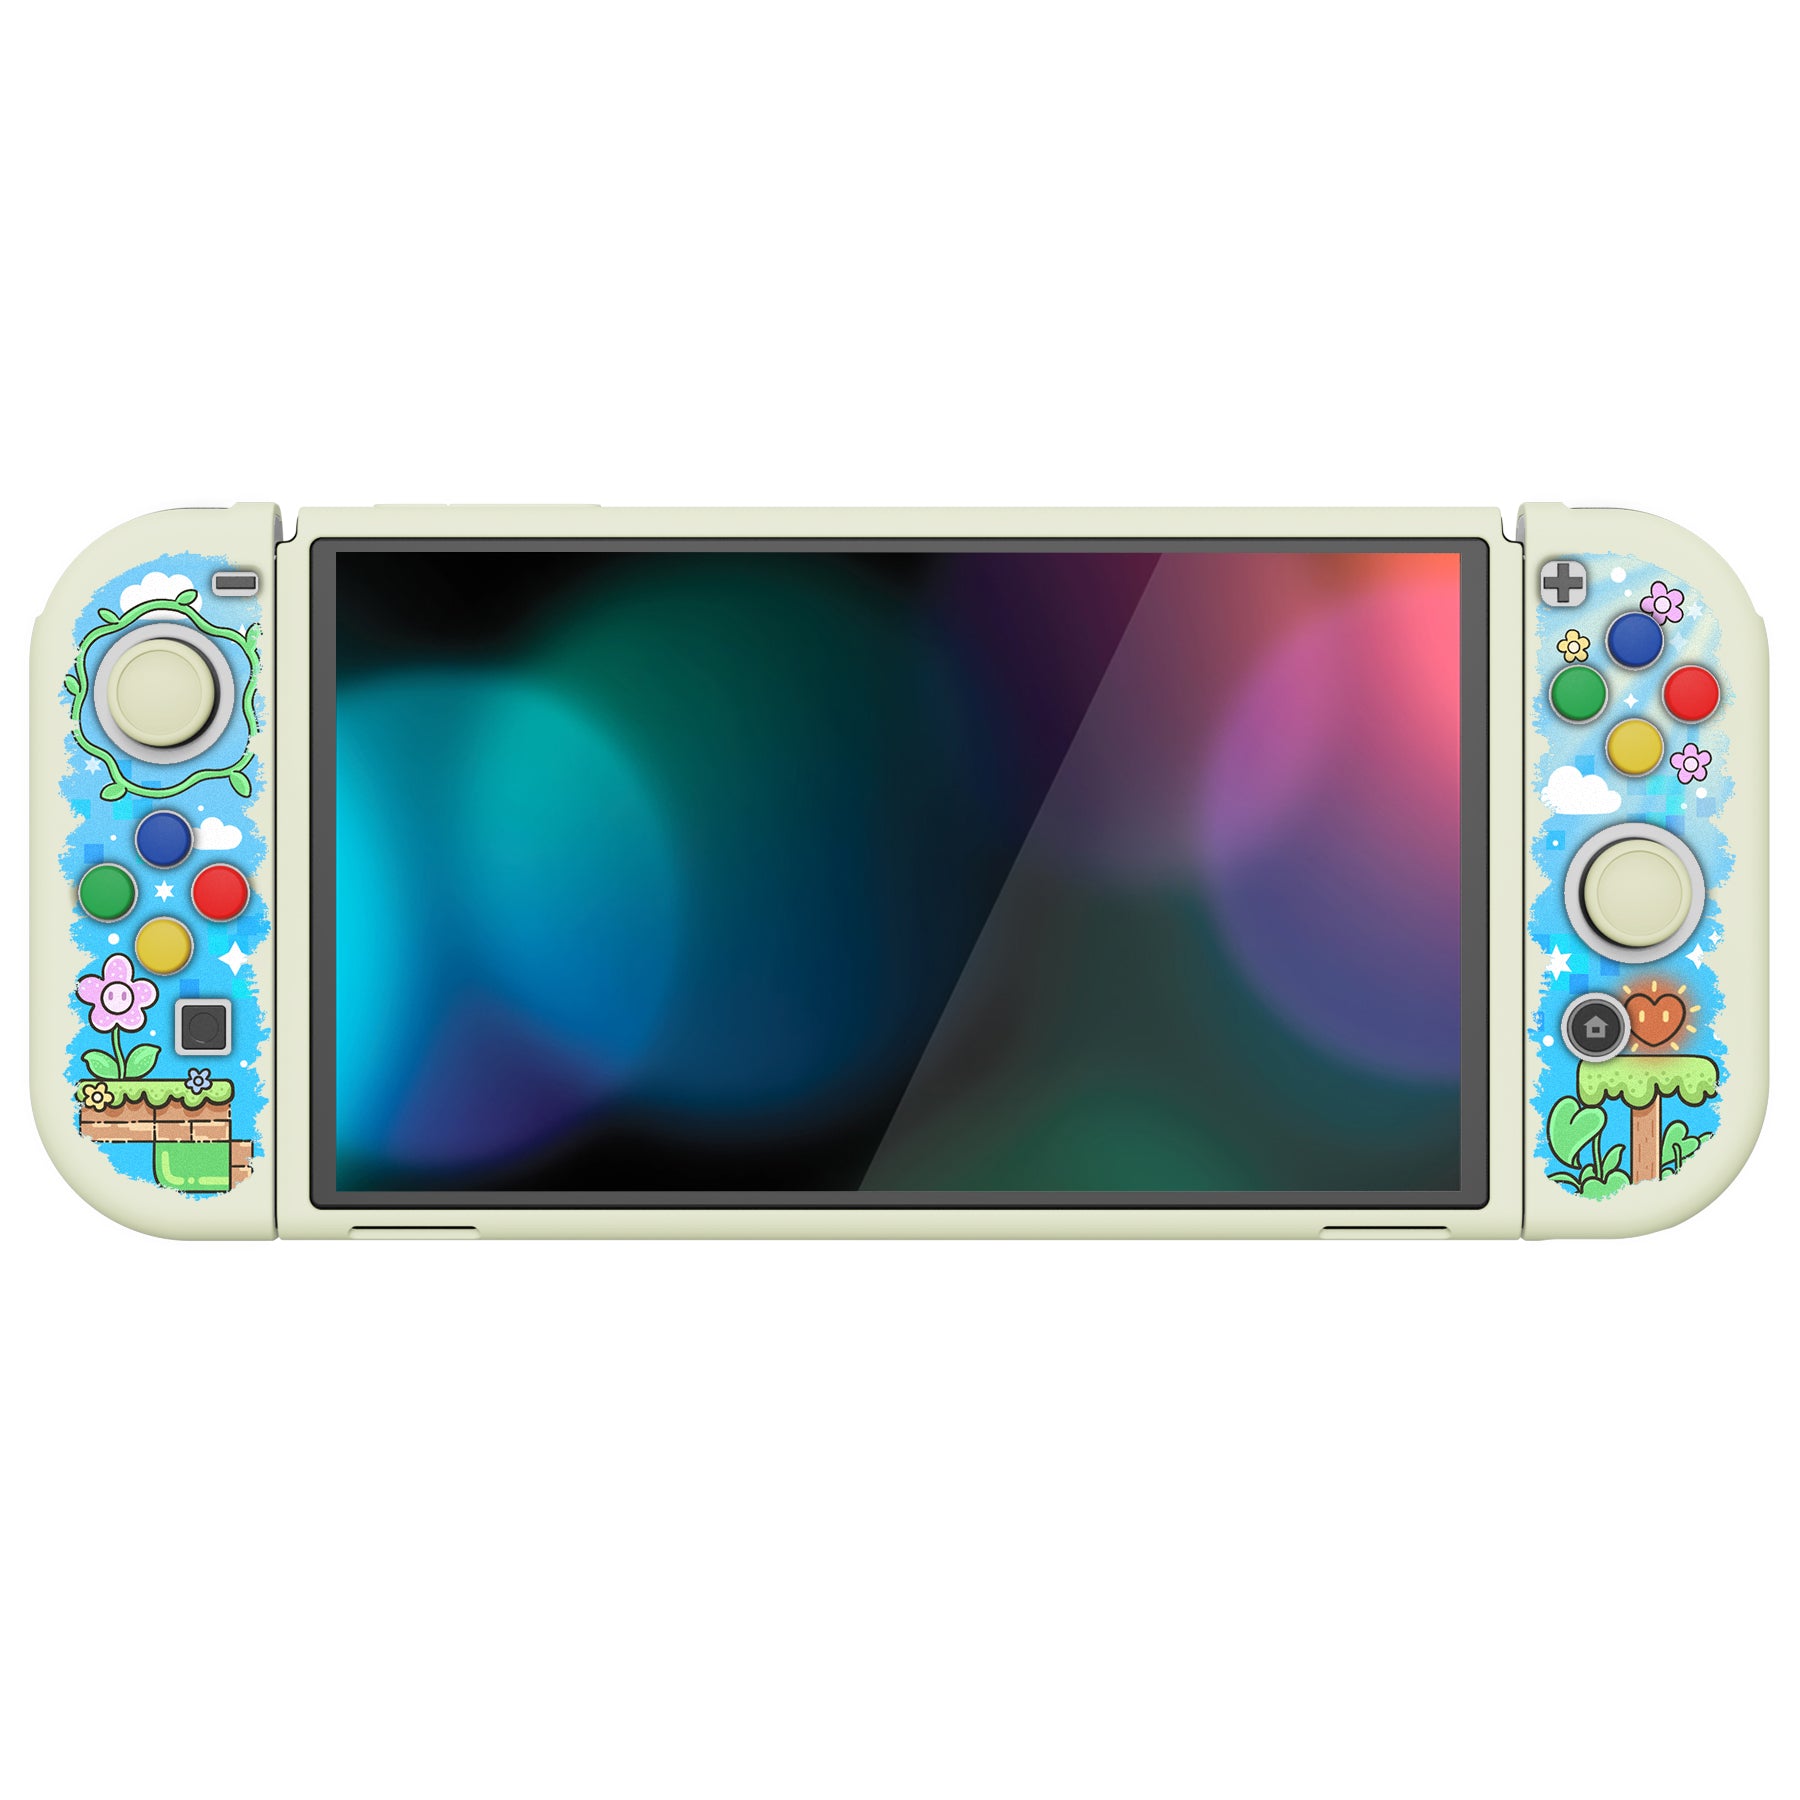 PlayVital ZealProtect Soft Protective Case for Switch OLED, Flexible Protector Joycon Grip Cover for Switch OLED with Thumb Grip Caps & ABXY Direction Button Caps - Blocks Adventure - XSOYV6042 playvital